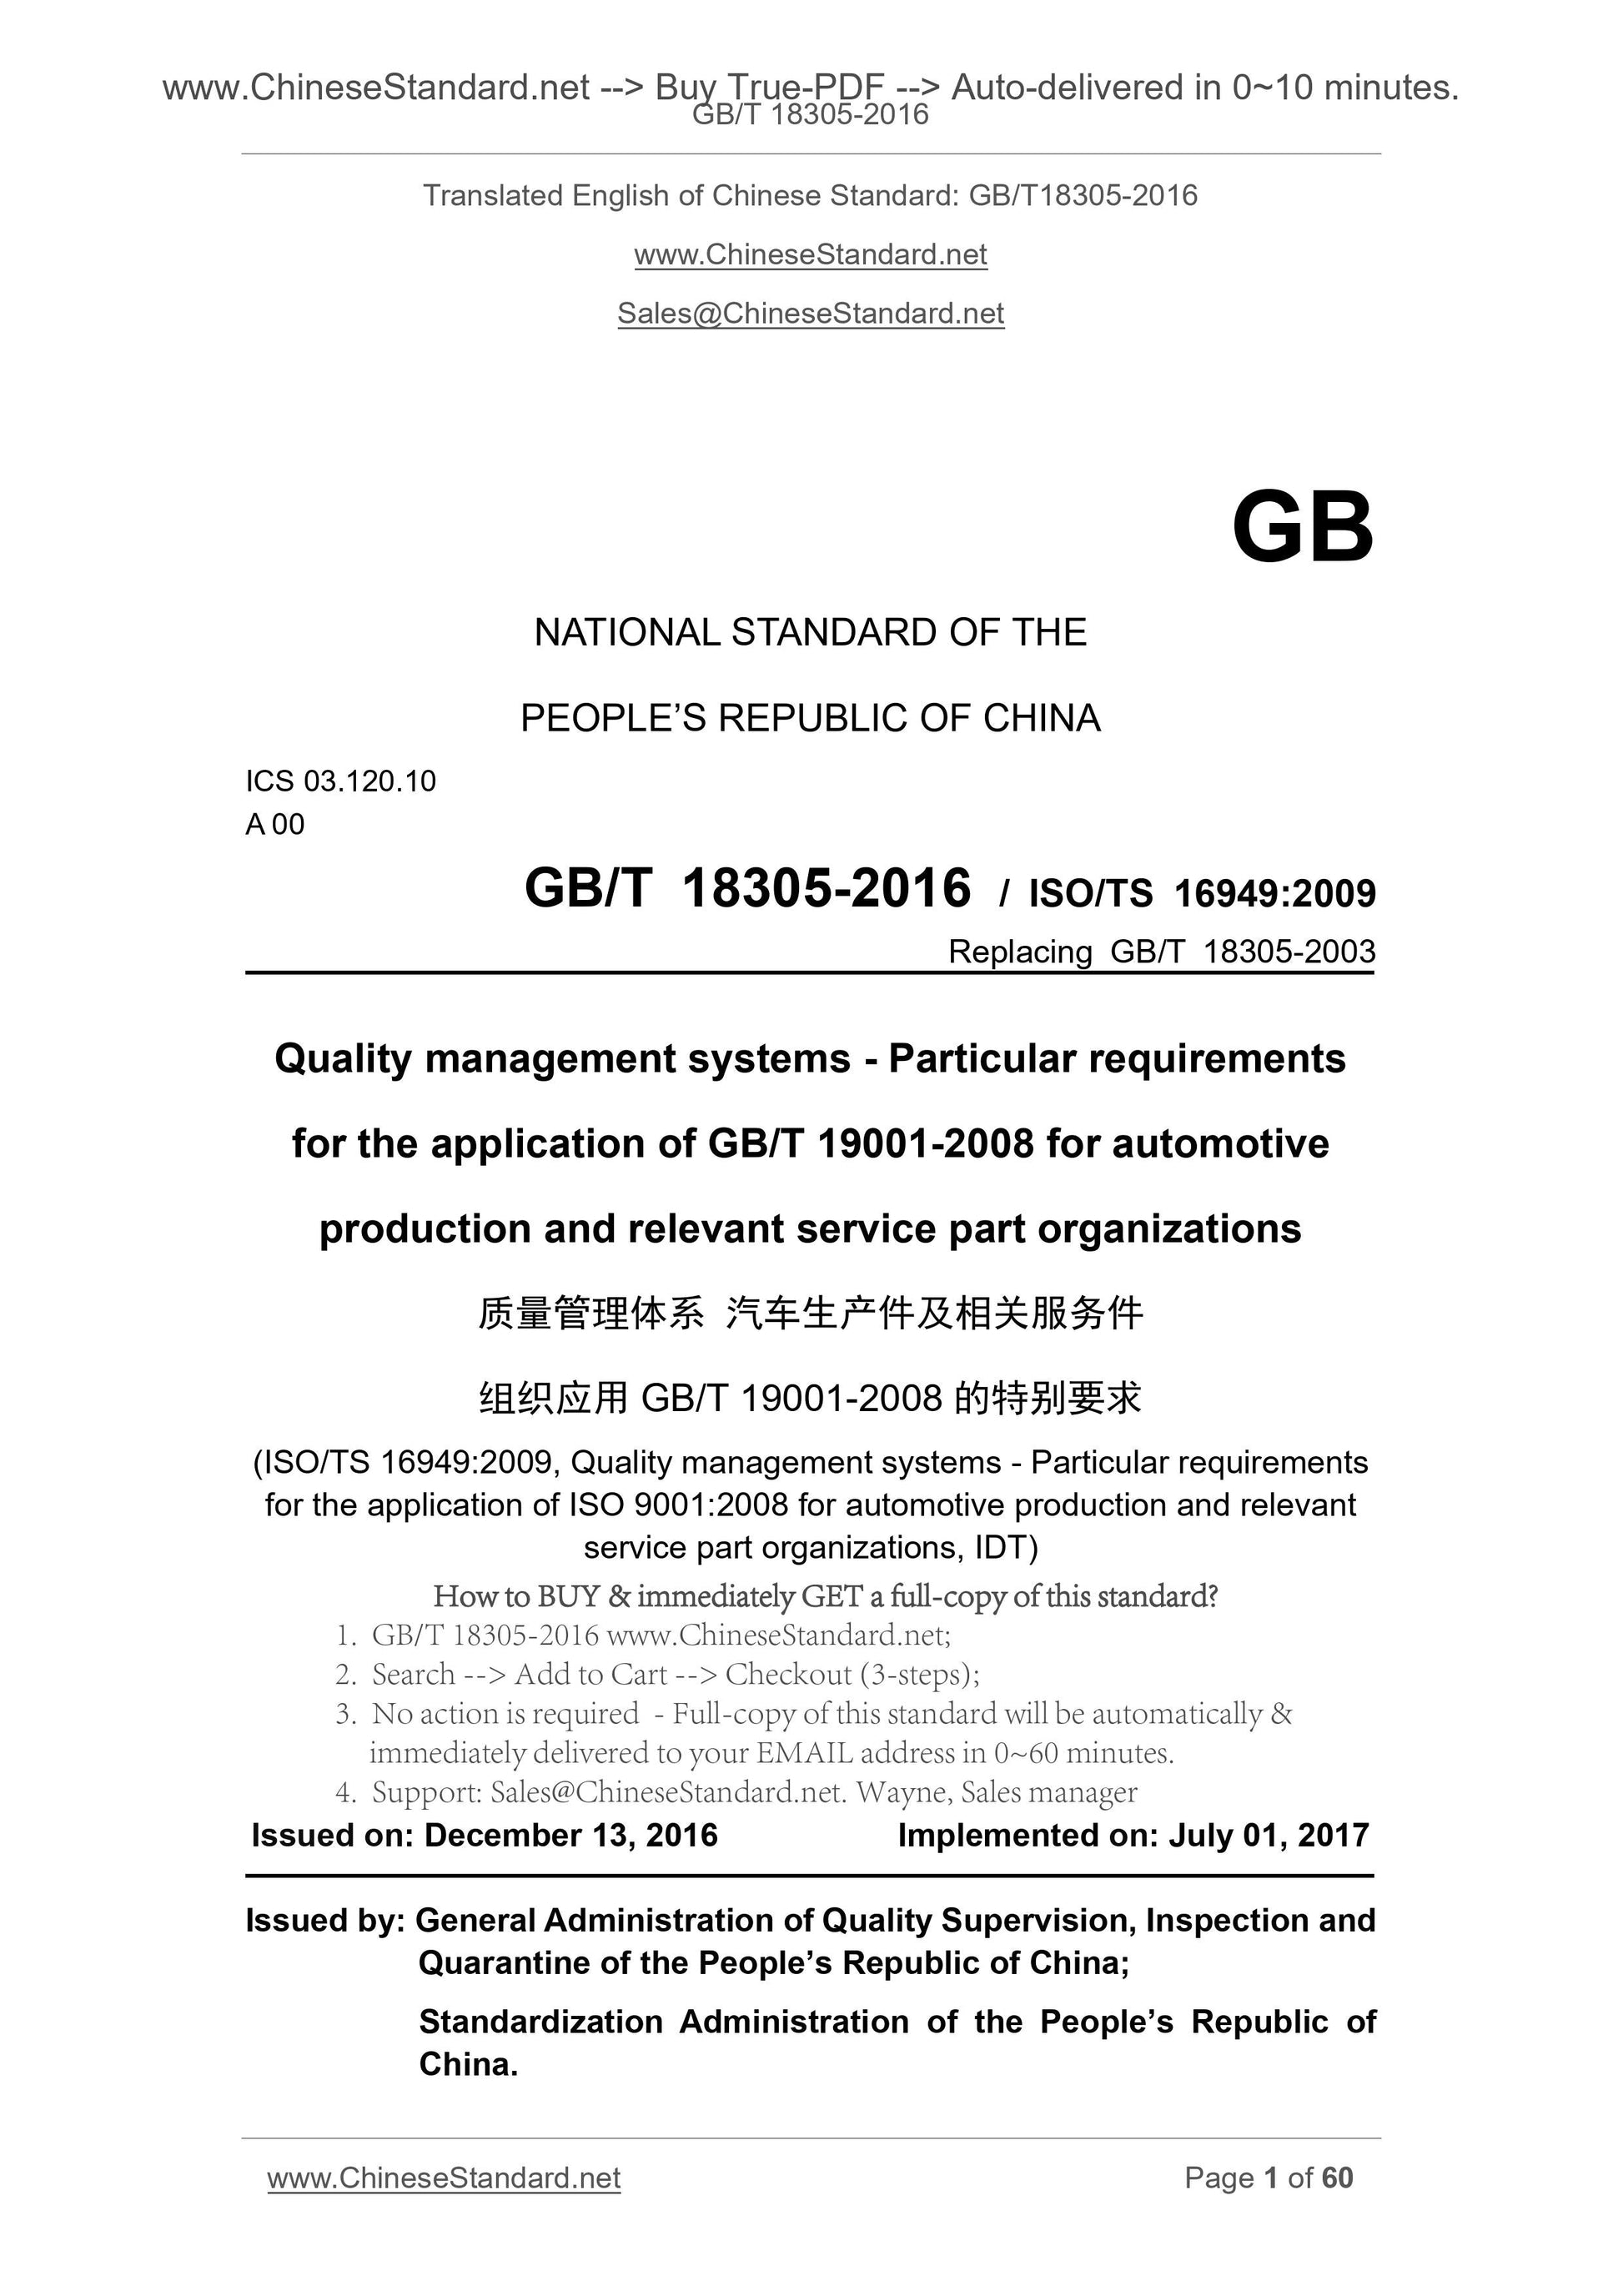 GB/T 18305-2016 Page 1